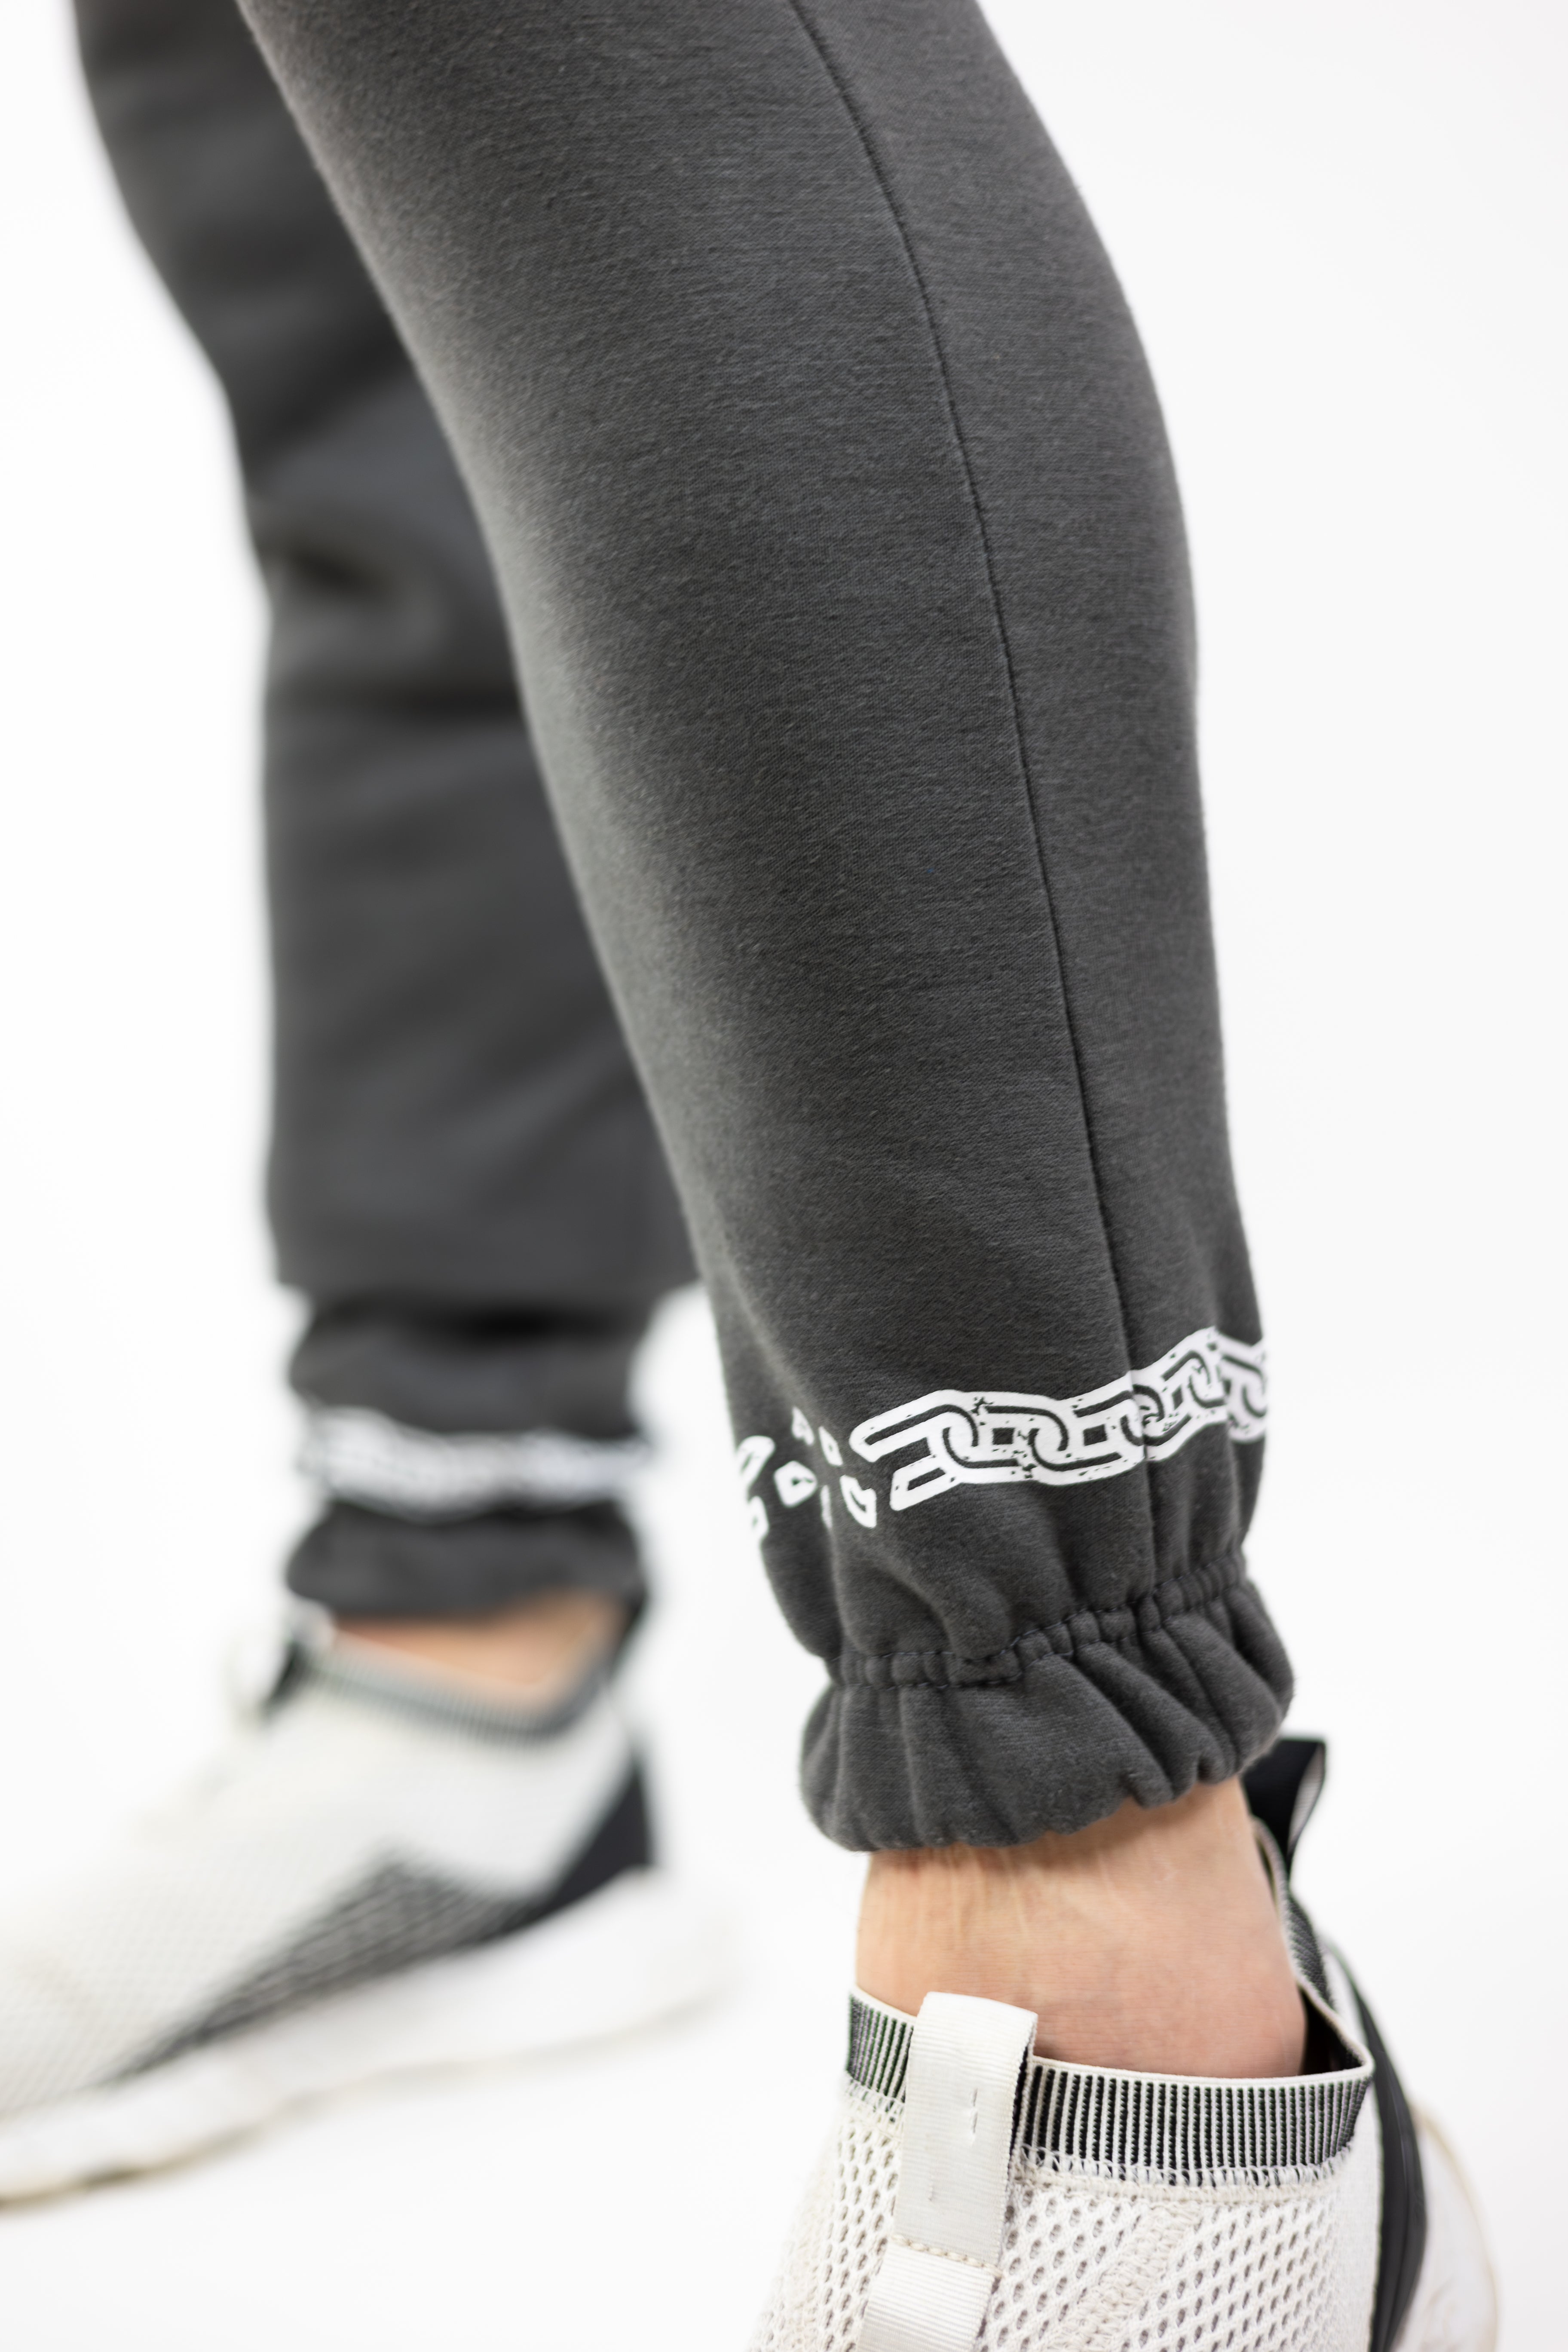 man wearing gray Strength of One sweatpants with white chain graphic going around ankle